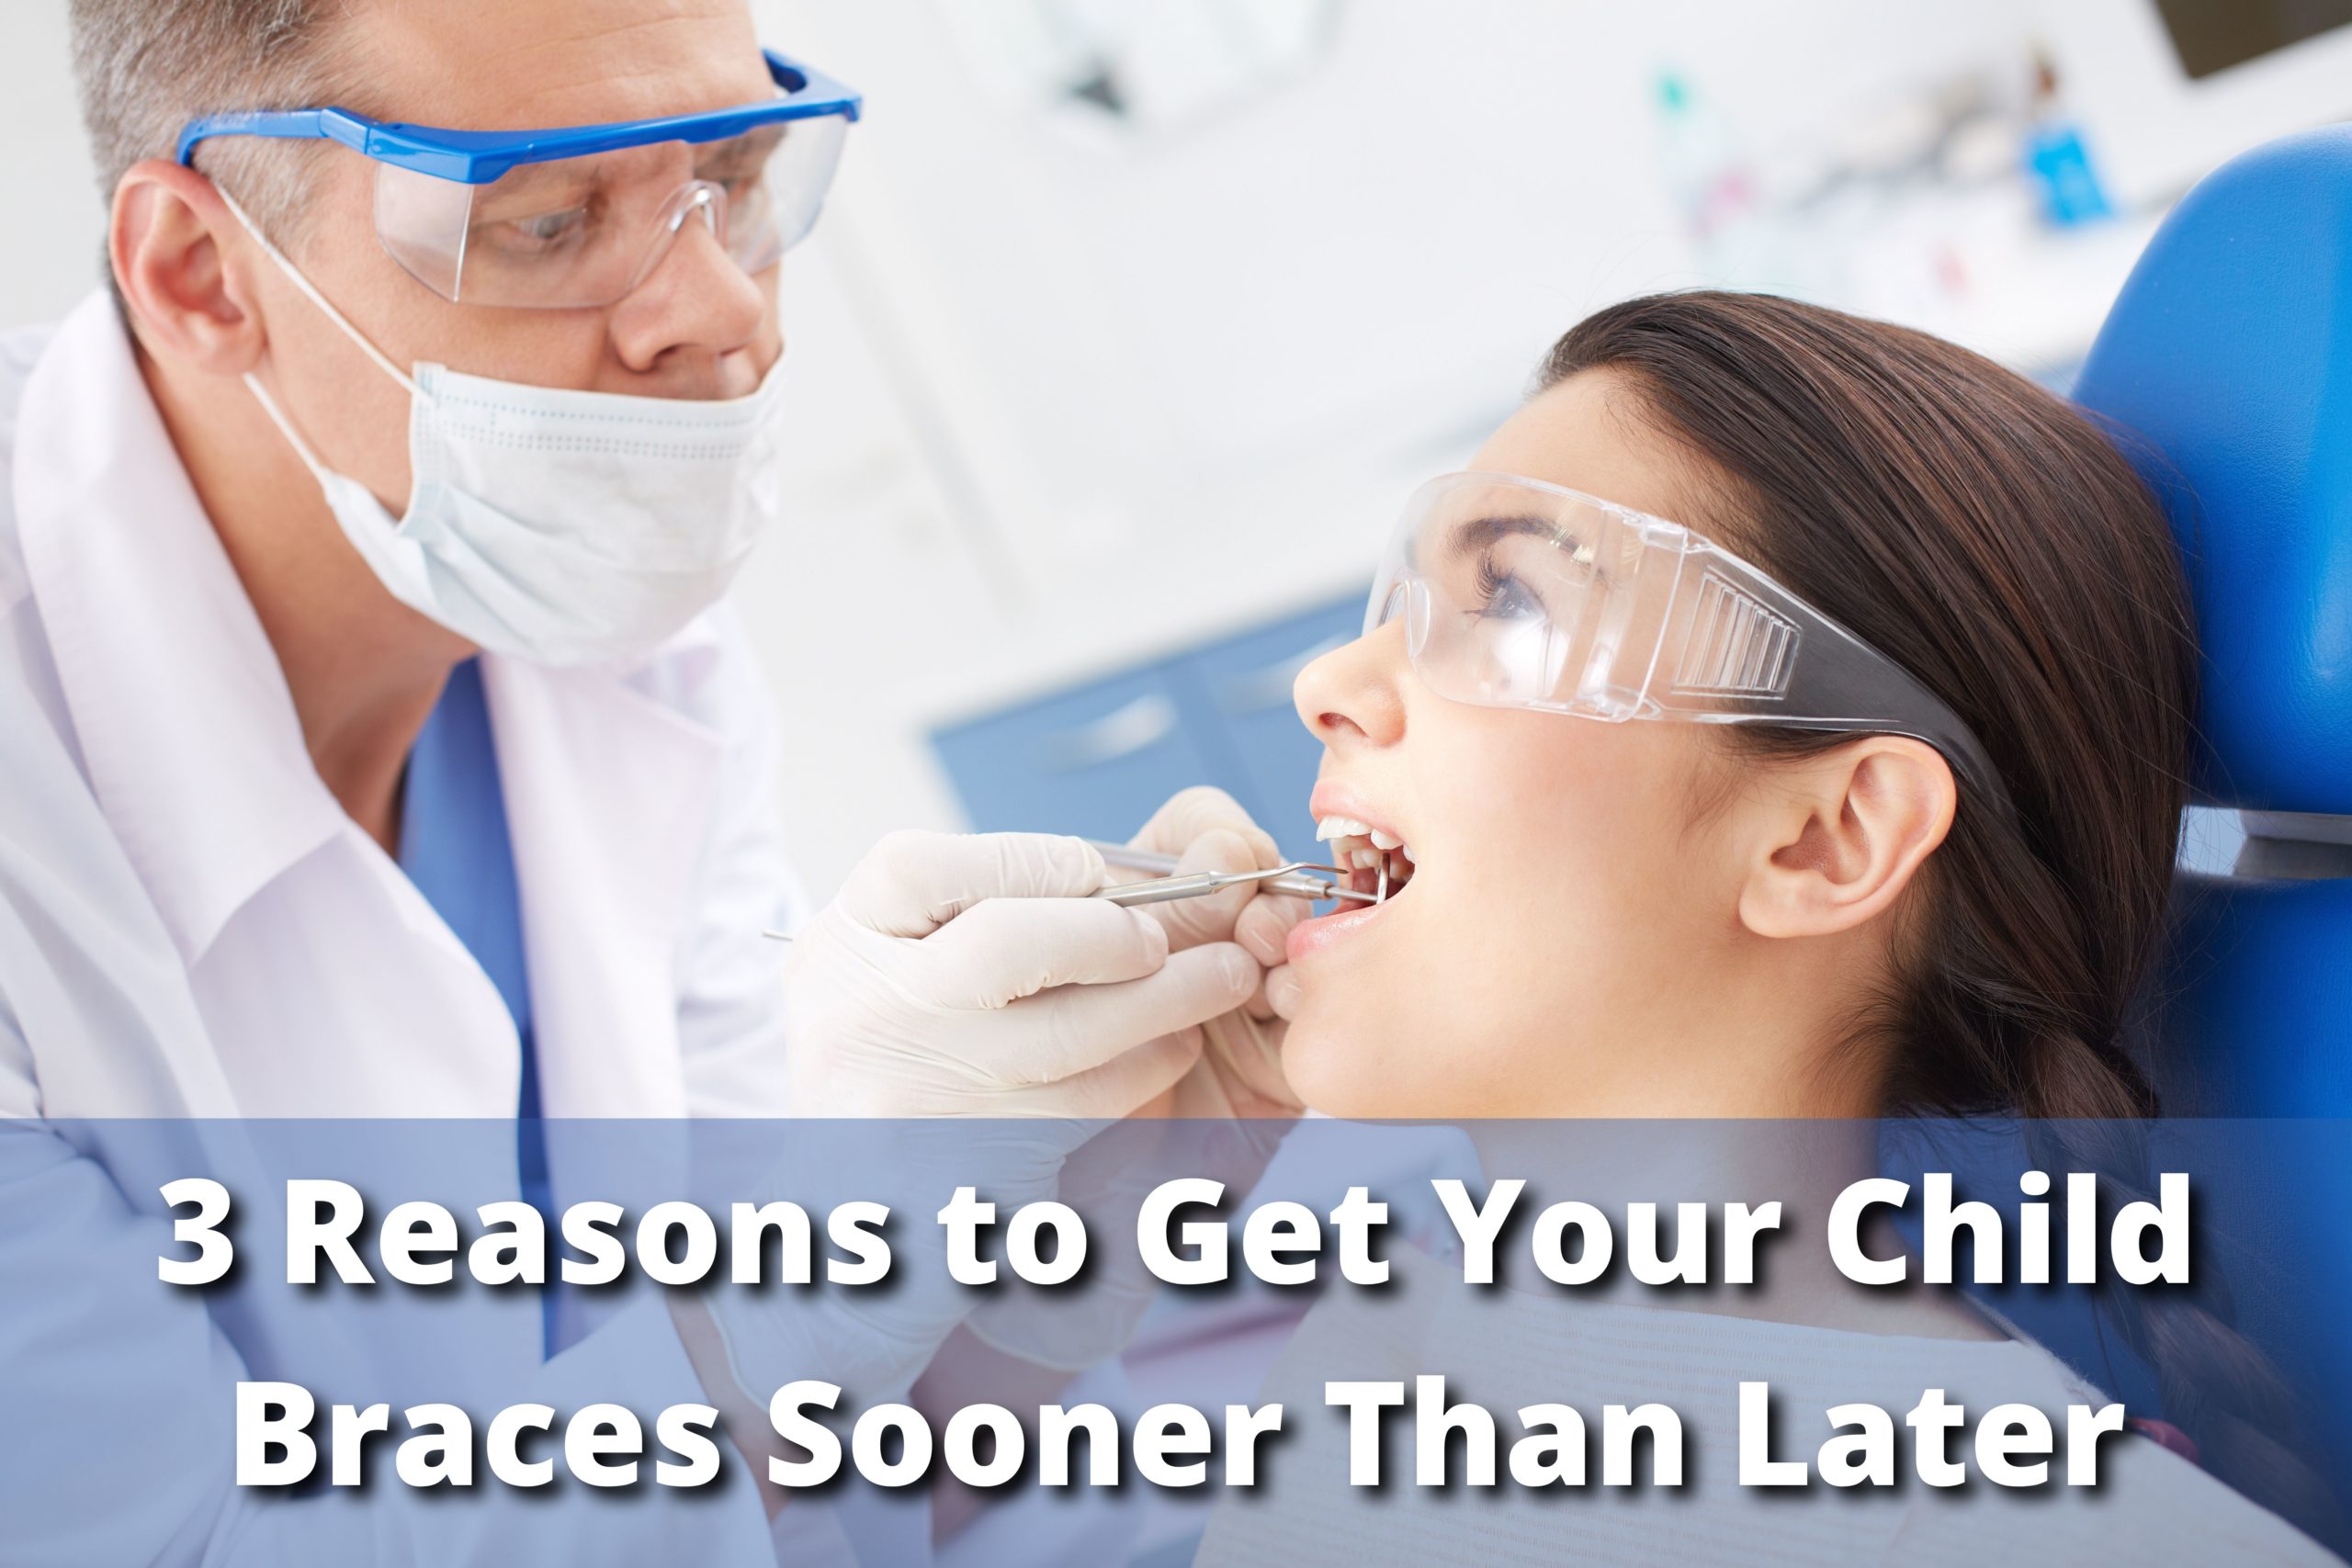 3 Reasons to Get Your Child Braces Sooner Than Later